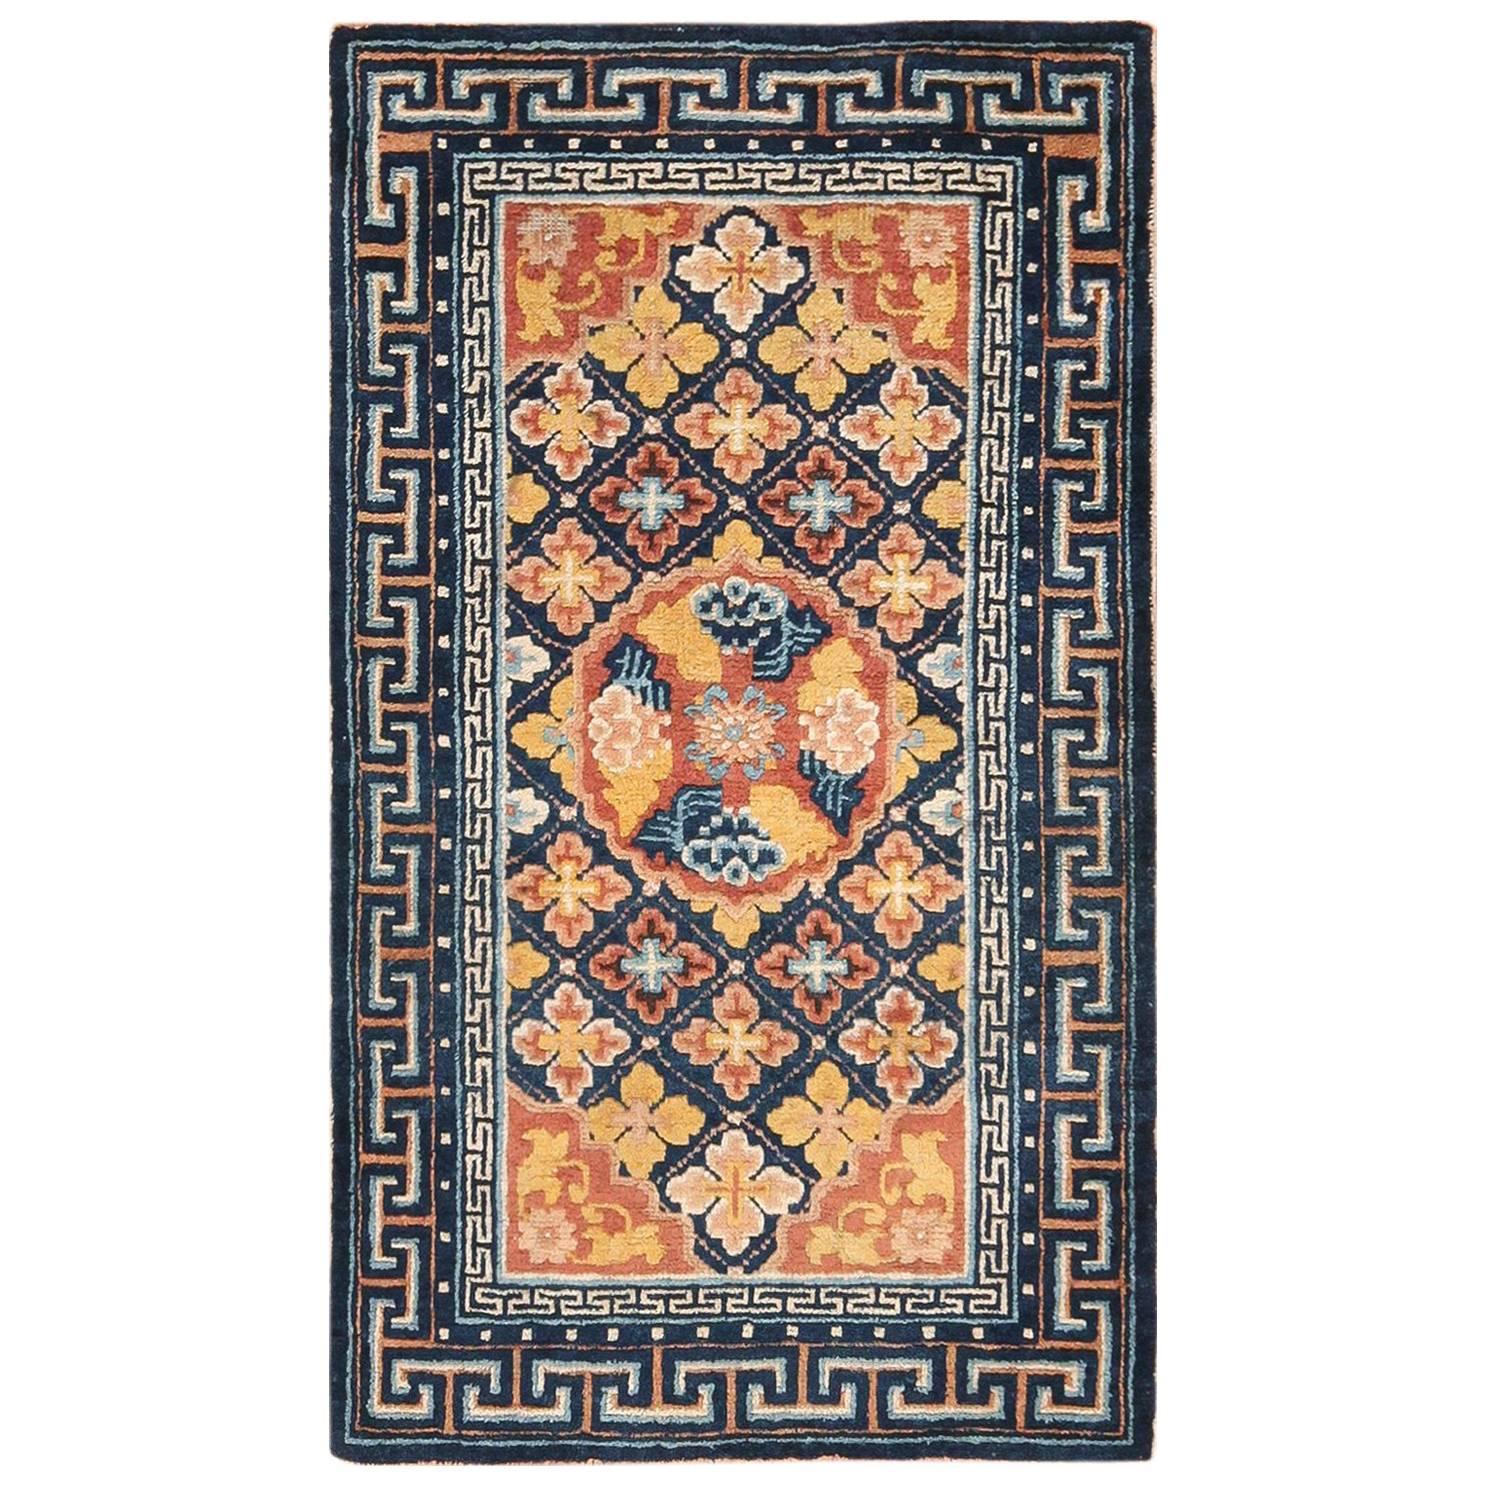 Small Size Antique Chinese Ningxia Rug